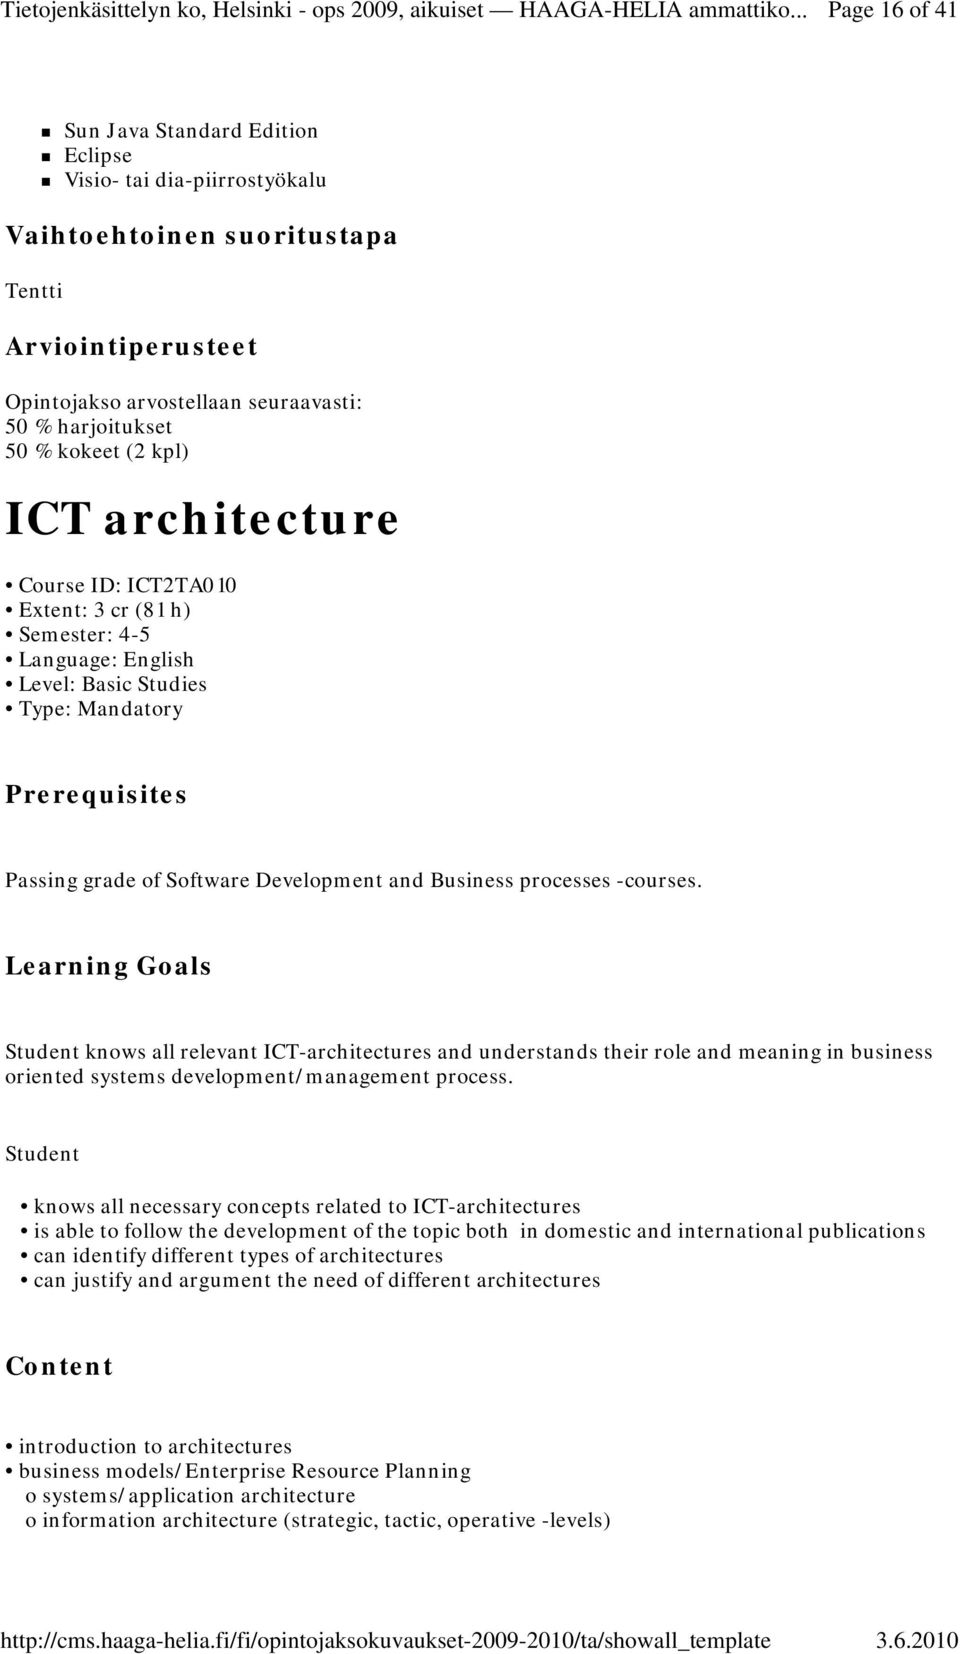 processes -courses. Learning Goals Student knows all relevant ICT-architectures and understands their role and meaning in business oriented systems development/management process.